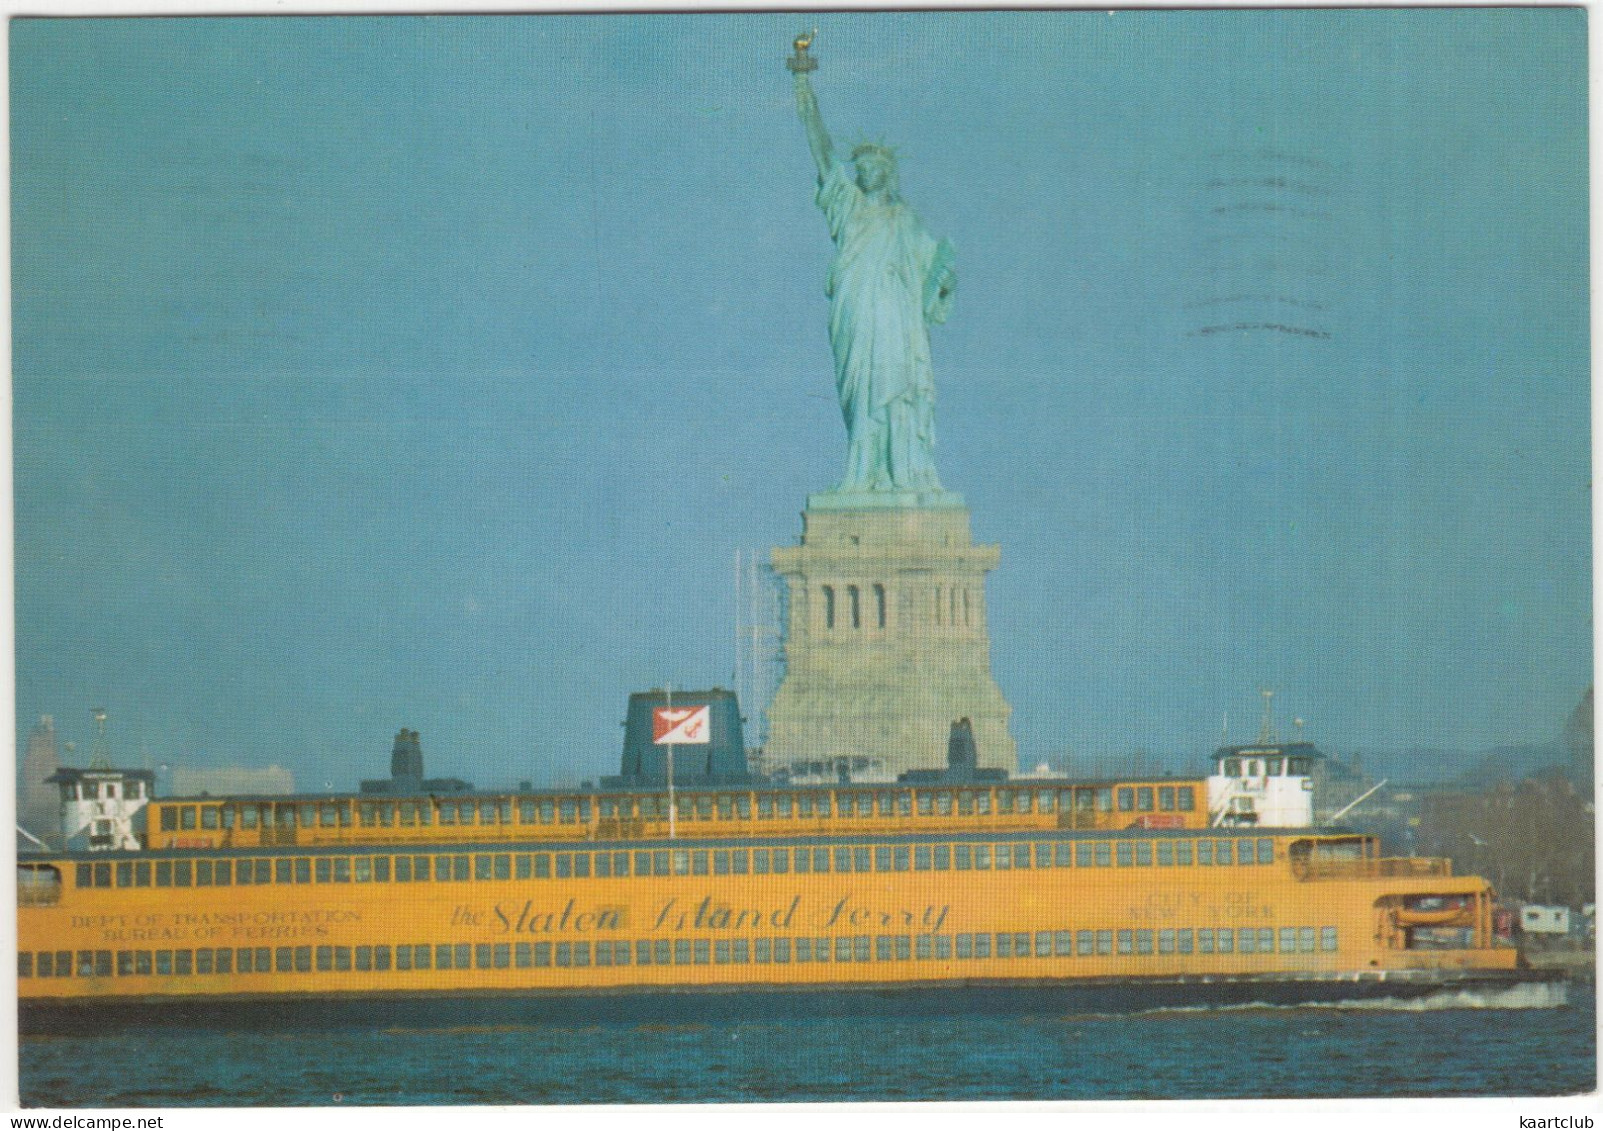 Statue Of Liberty And 'The Staten Island'  Ferry, New York City - (N.Y. - USA) - Statue Of Liberty